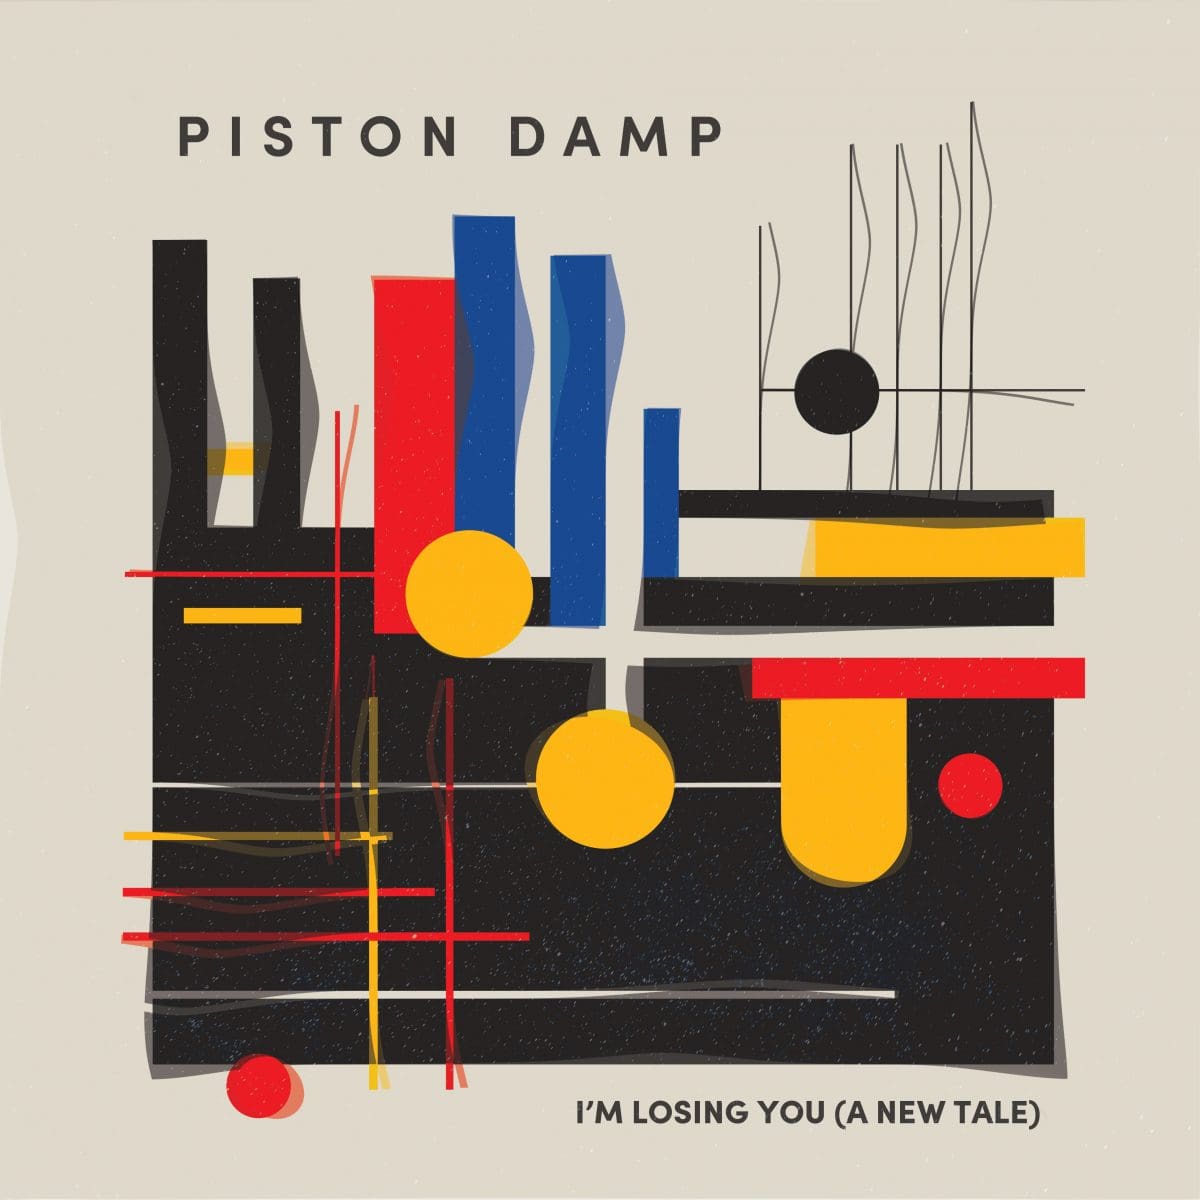 'runaway' - Third Single from Piston Damp Incl. Remixes by Die Krupps, Mesh and Substaat